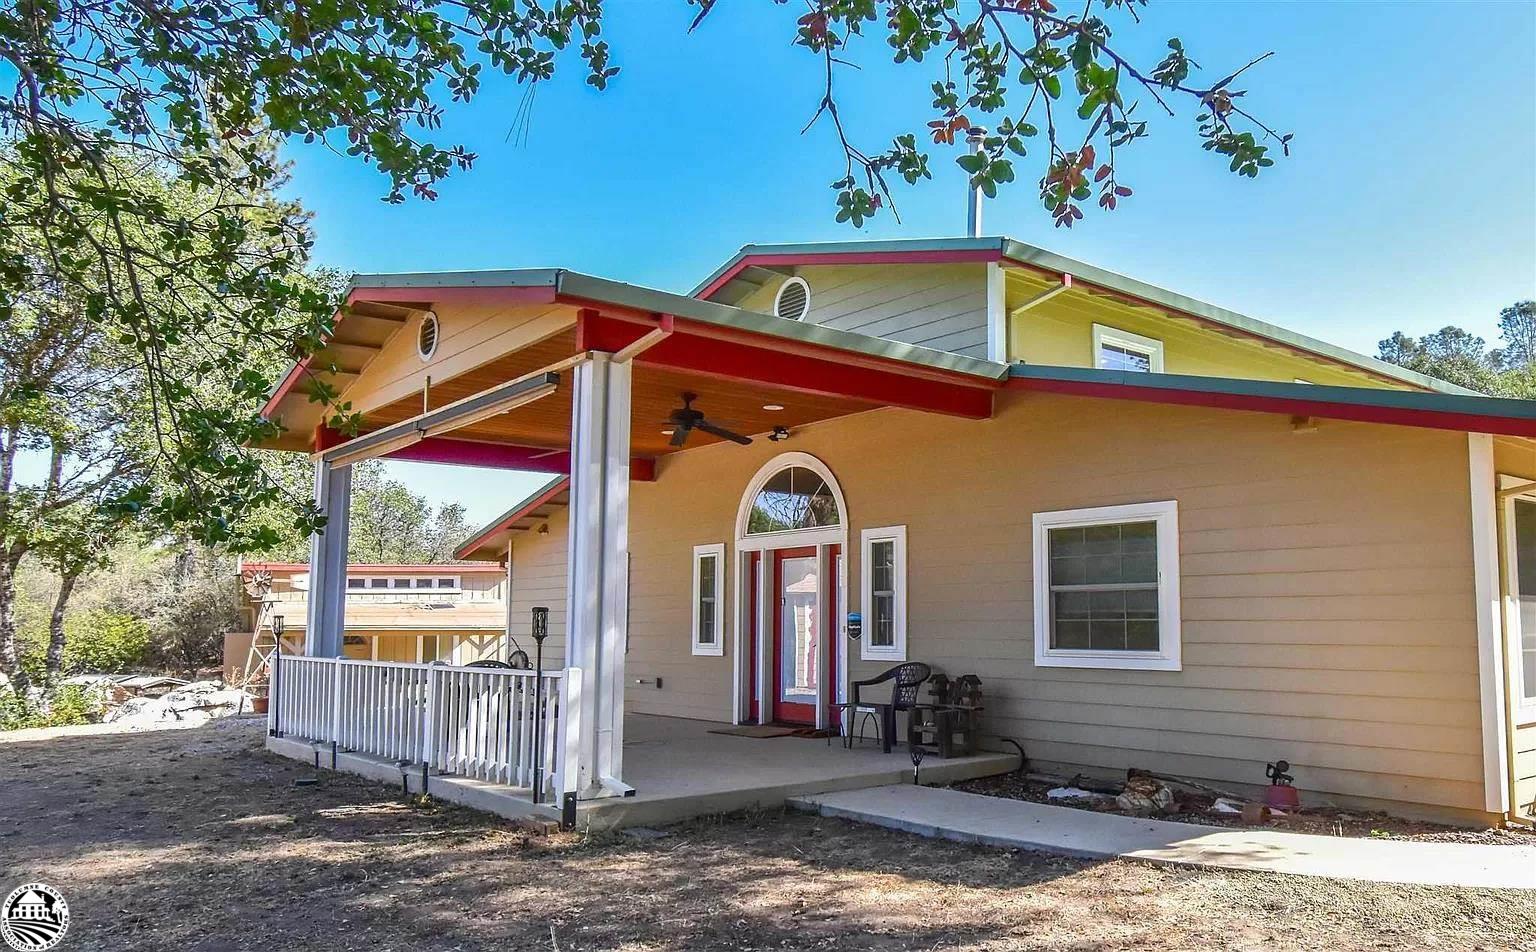 Photo of 10980 Union Hill Rd in Sonora, CA